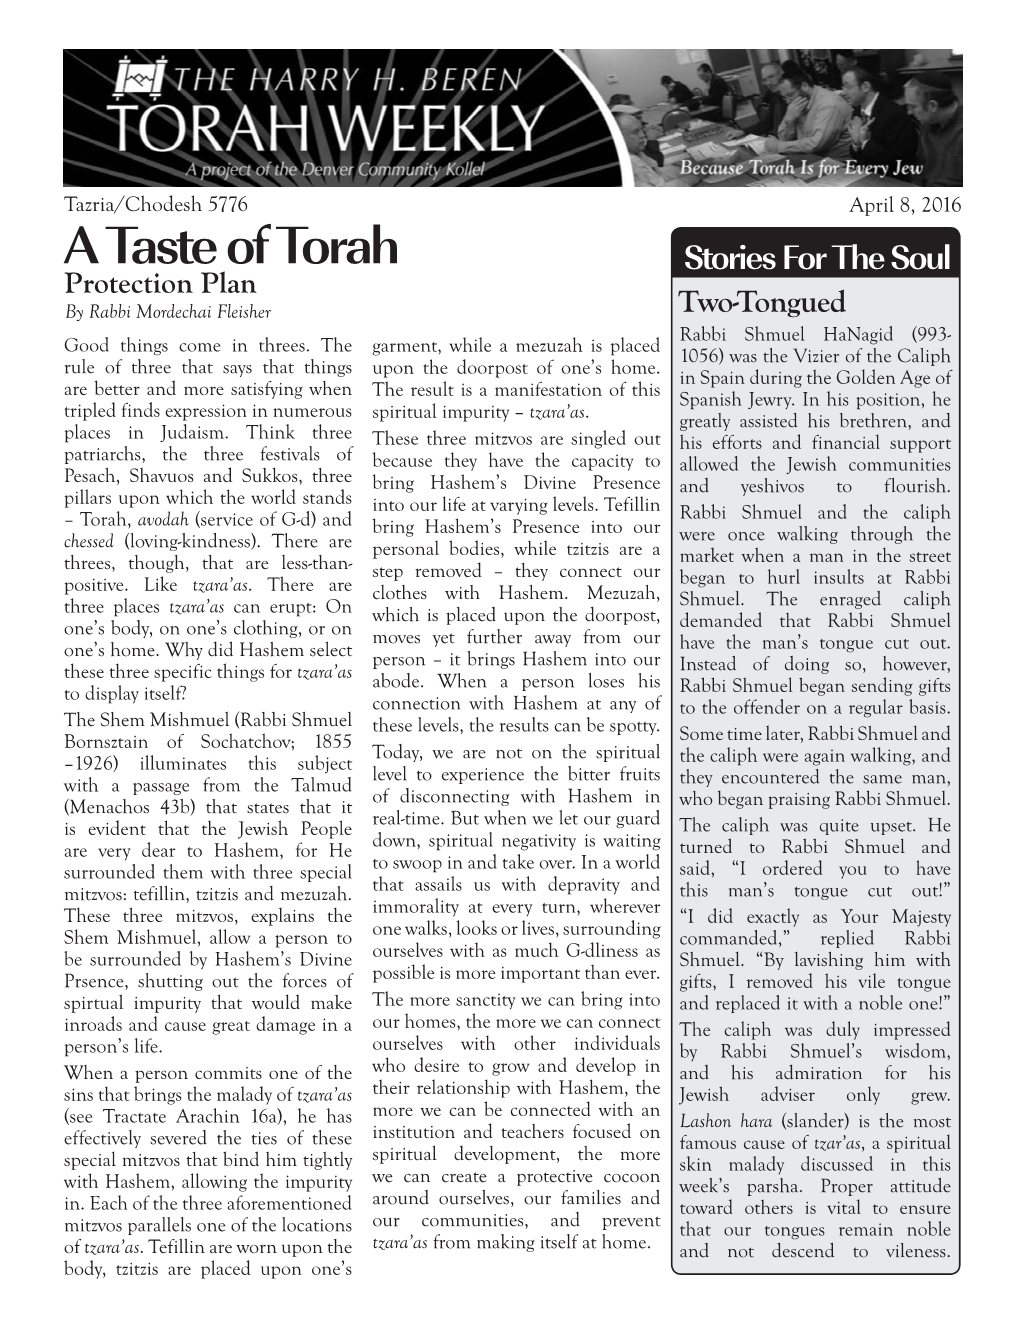 A Taste of Torah Stories for the Soul Protection Plan by Rabbi Mordechai Fleisher Two-Tongued Rabbi Shmuel Hanagid (993- Good Things Come in Threes